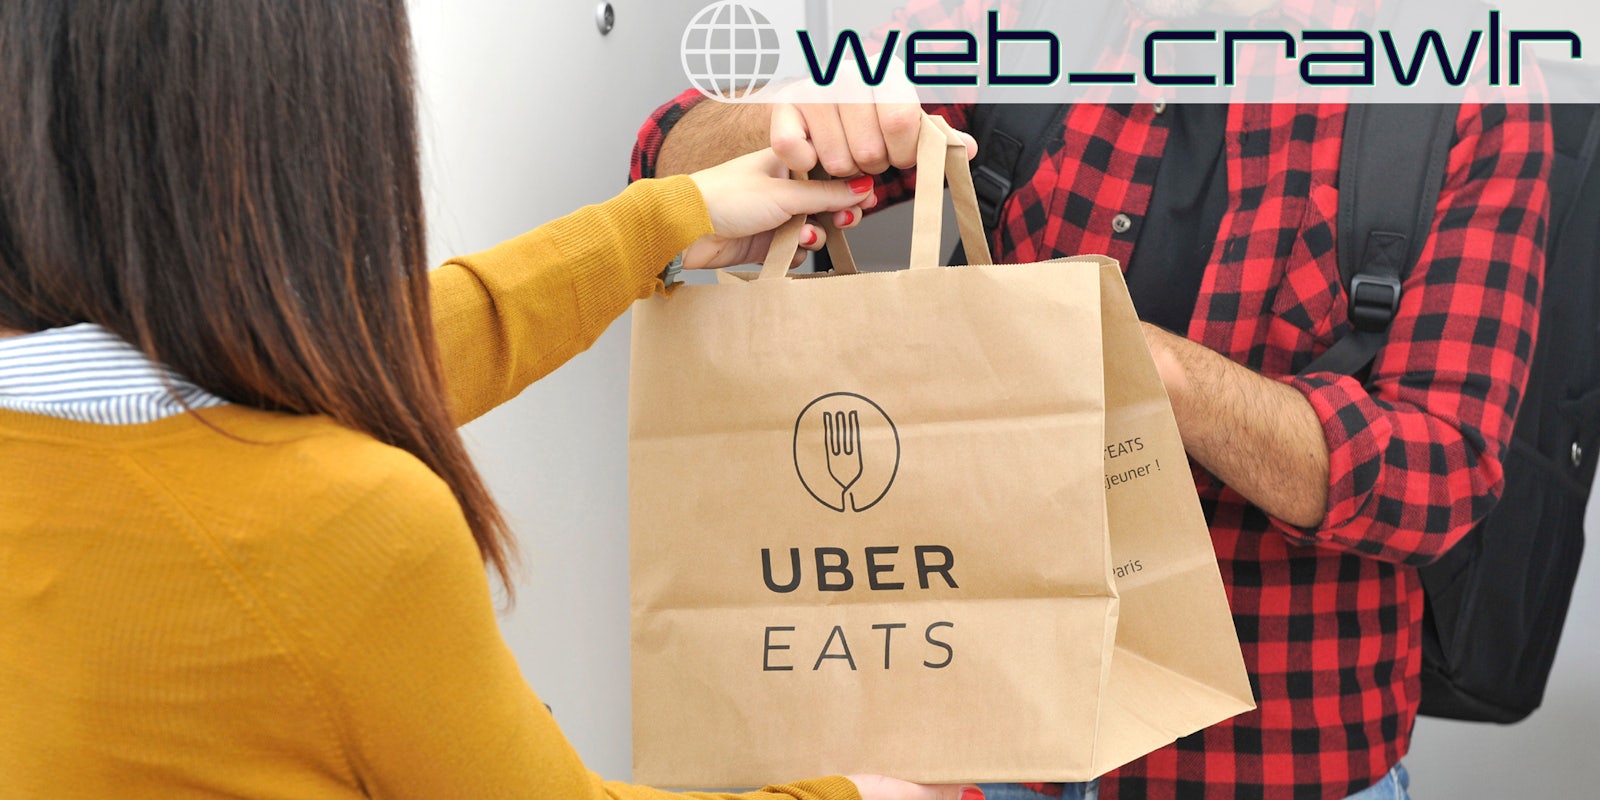 A person handing someone a bag with Uber Eats written on it. The Daily Dot newsletter web_crawlr logo is in the top right corner.